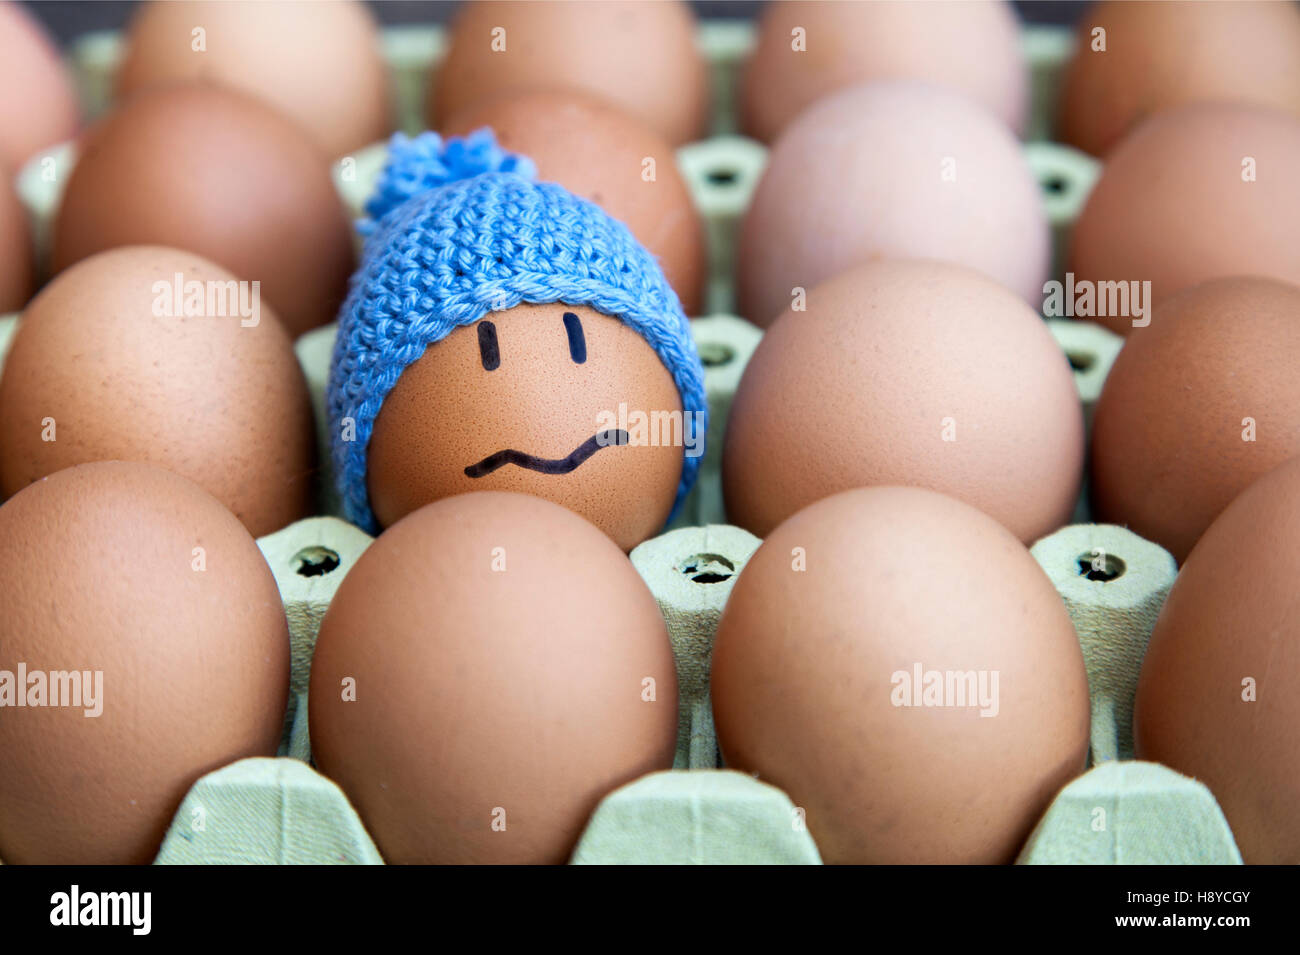 Unhappy in winter concept presented with egg character. Other possible concepts are: In troble, lost, problems, etc... Stock Photo